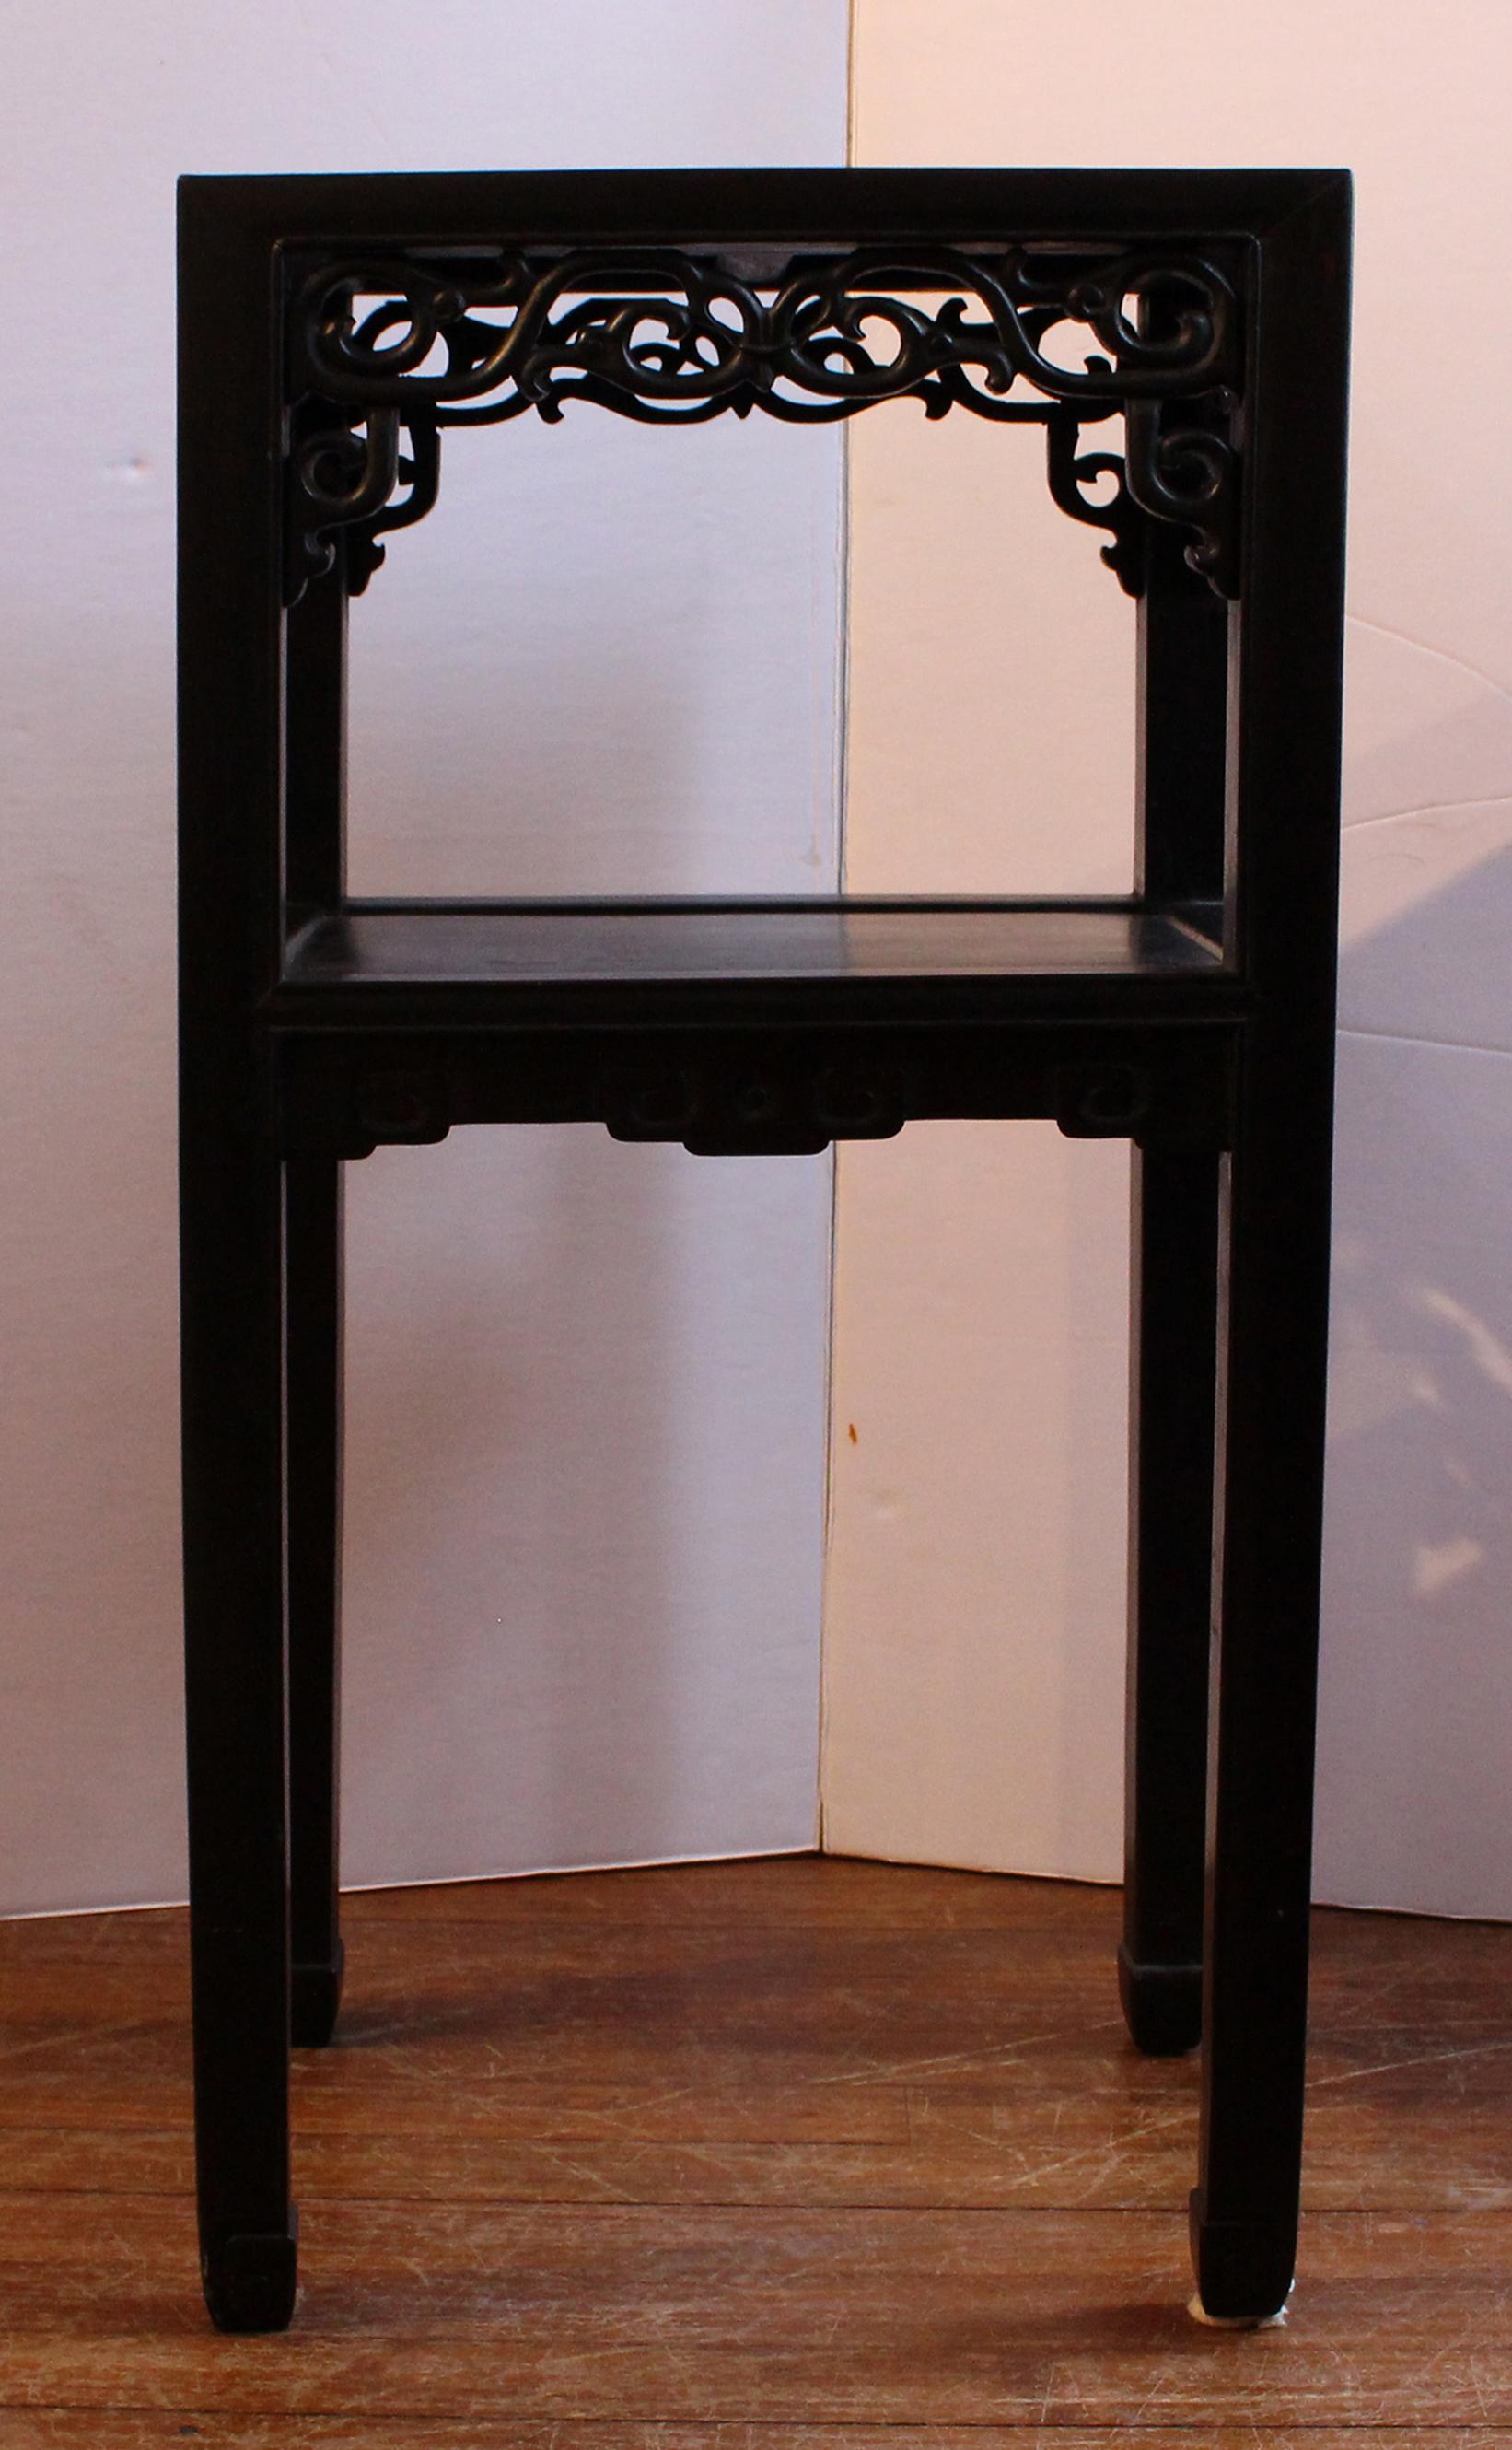 Circa 1860-80 Chinese carved wood & marble inset stand table. Qing dynasty. The upper shelf with pierced apron, the lower intaglio carved.

Measures: 31 1/2